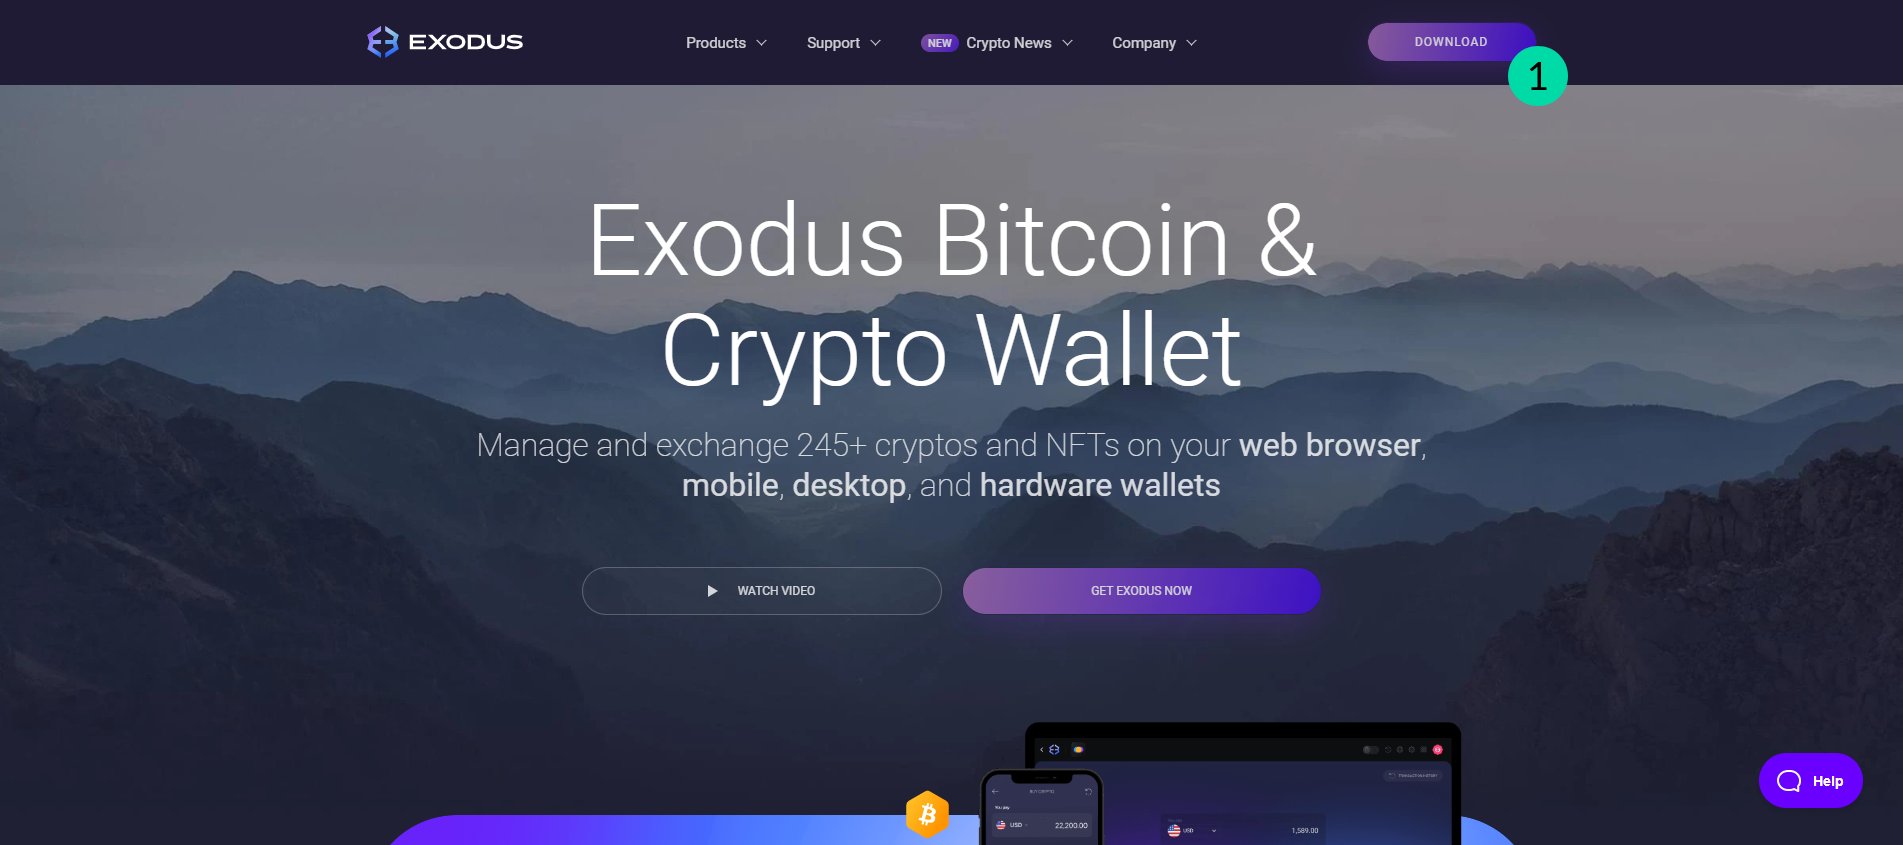 Exodus Crypto Wallet Review Pros, Cons and How It Compares - NerdWallet